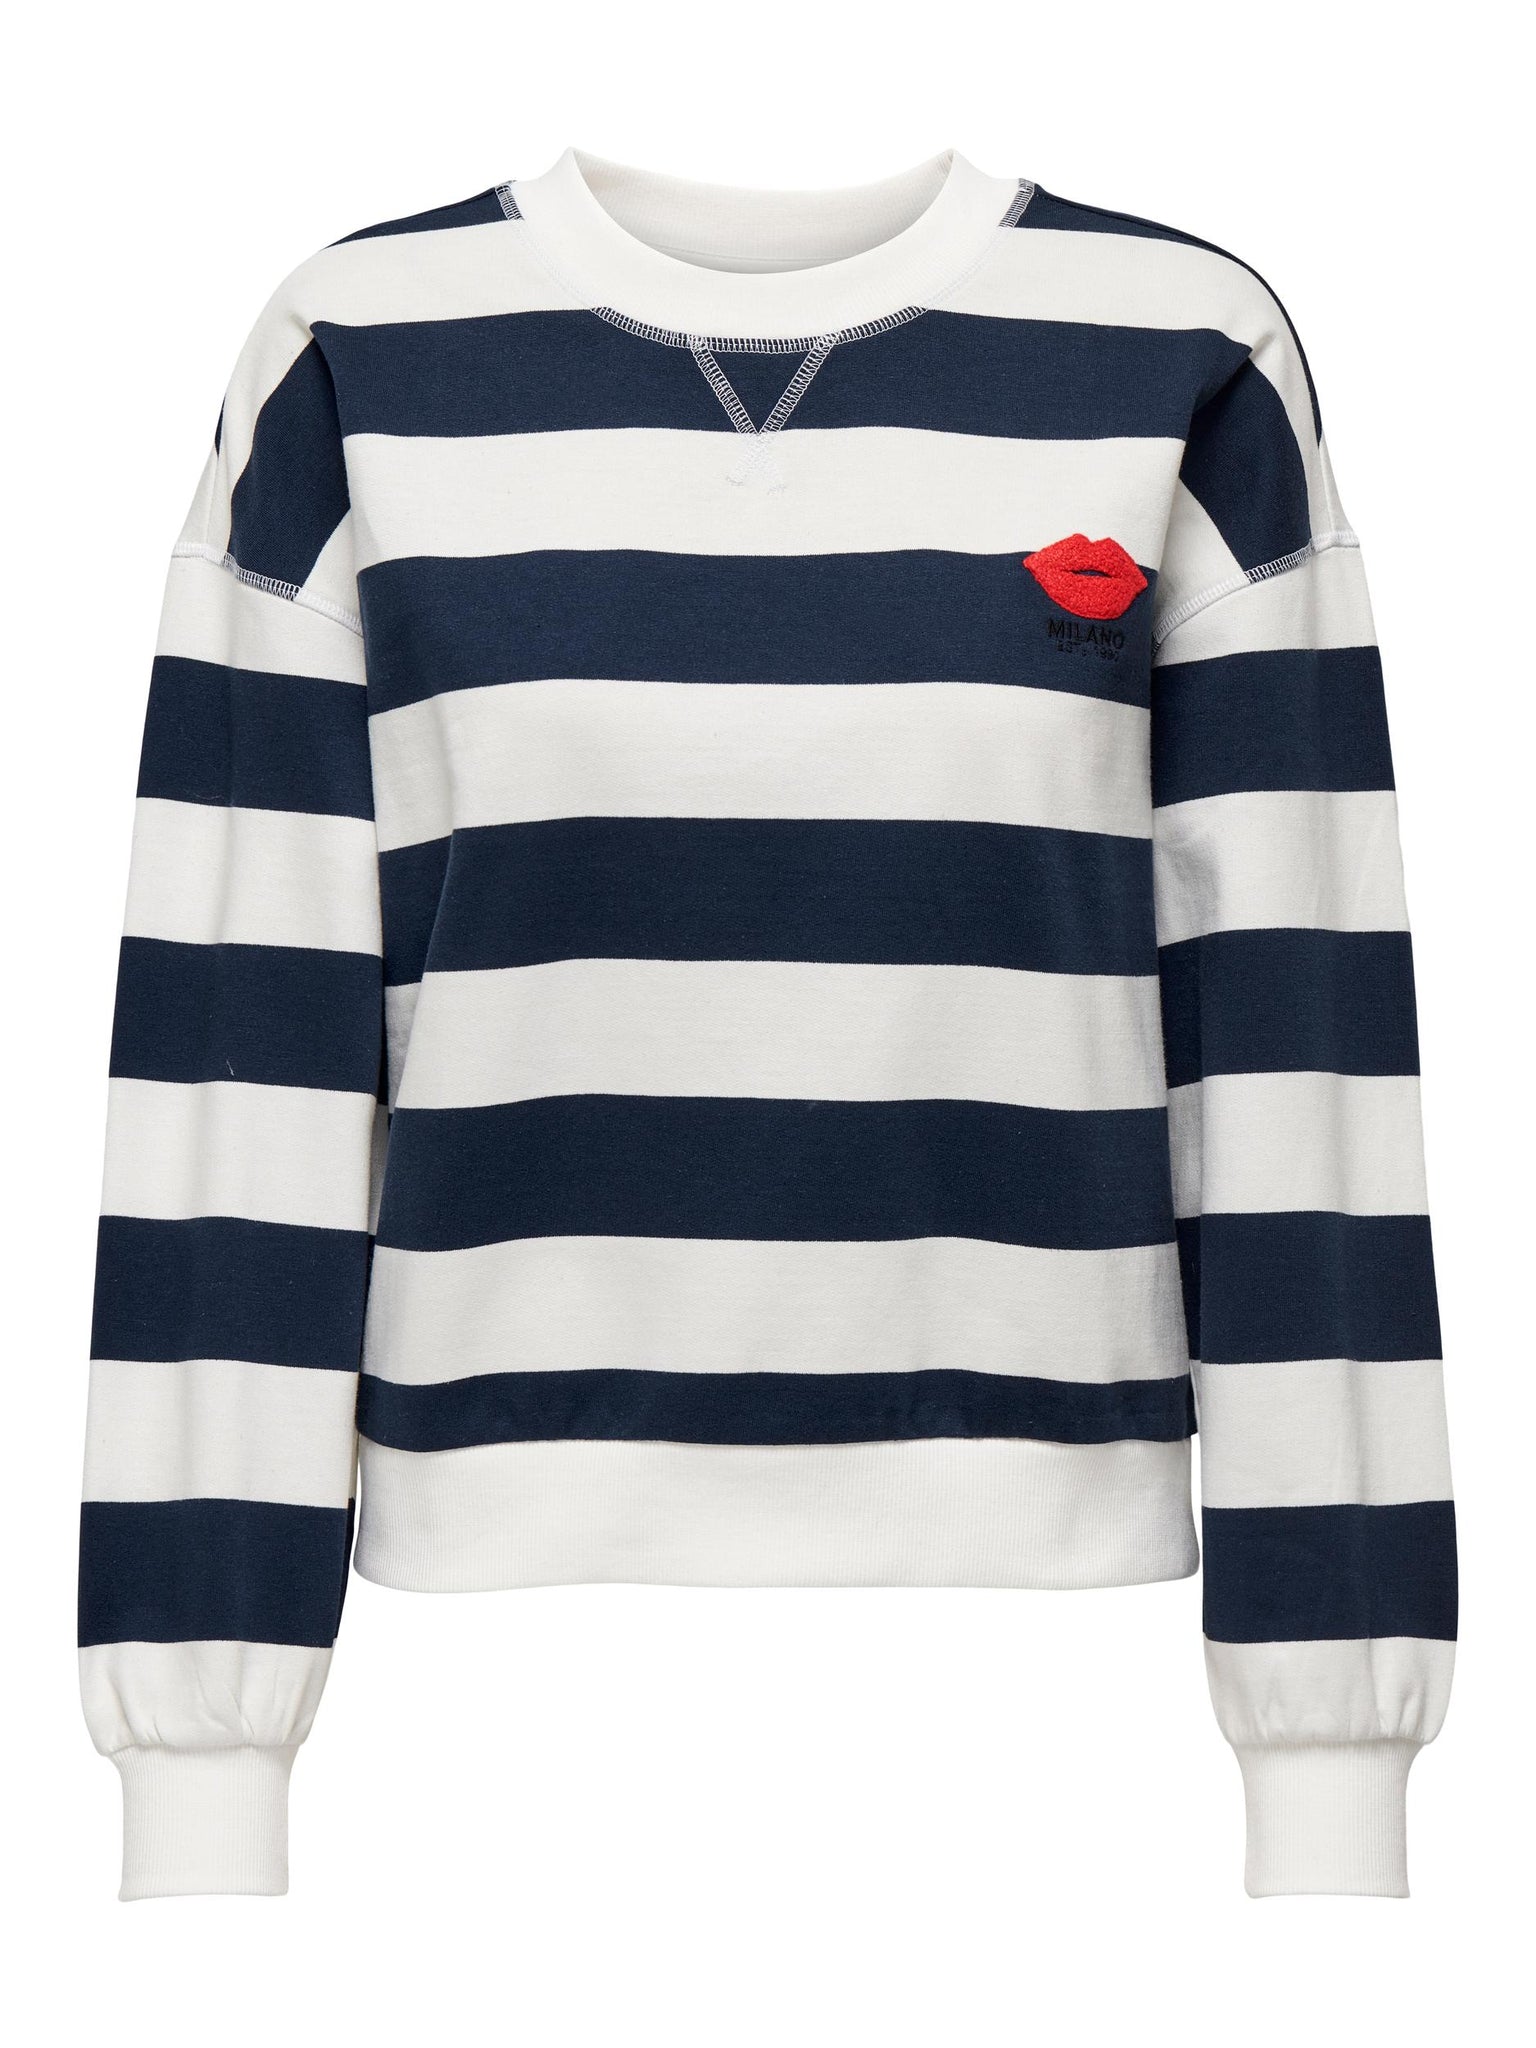 Only Striped 'Milano' Embroidered Sweatshirt in Navy